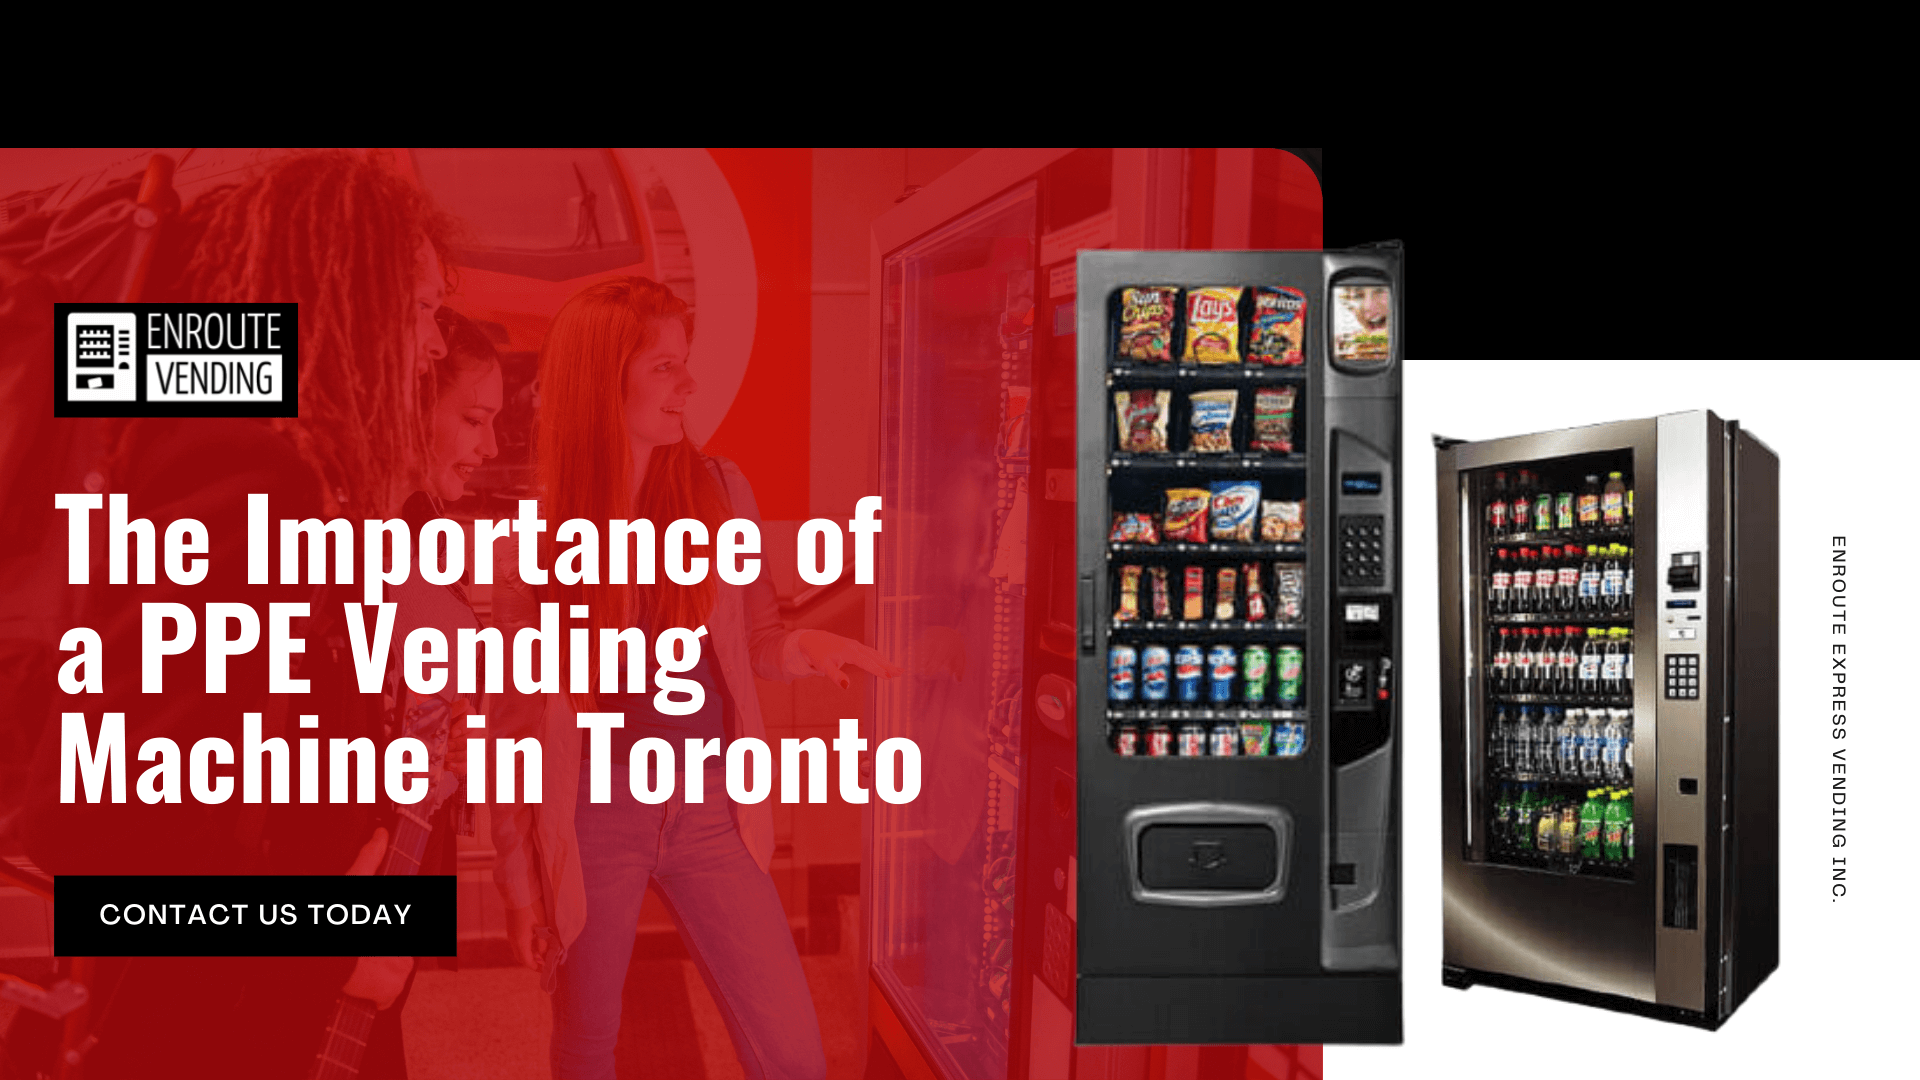 The Importance of a PPE Vending Machine in Toronto